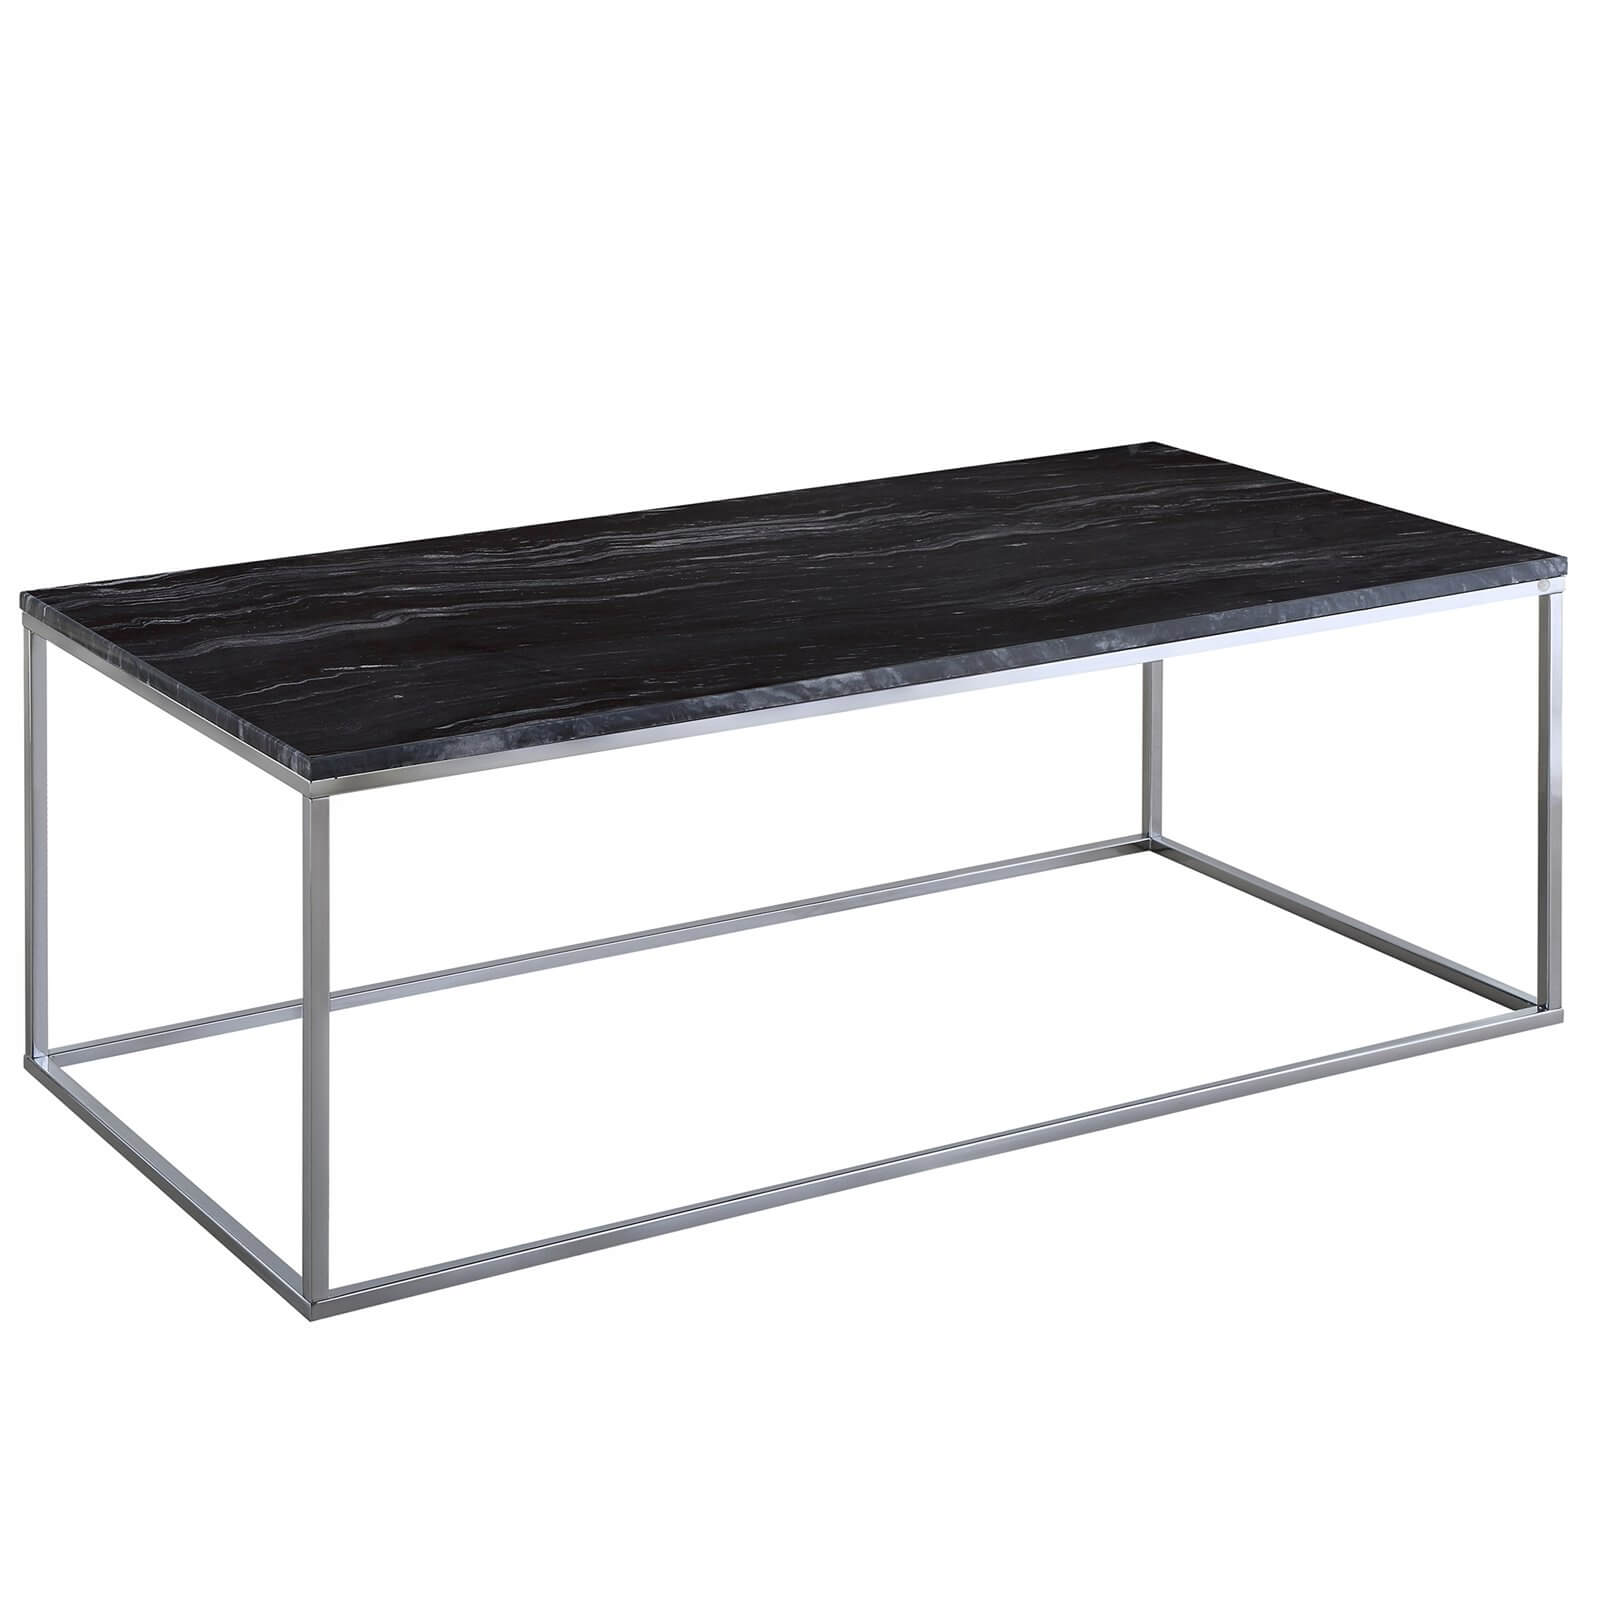 Signet Coffee Table - Black Marble & Chrome